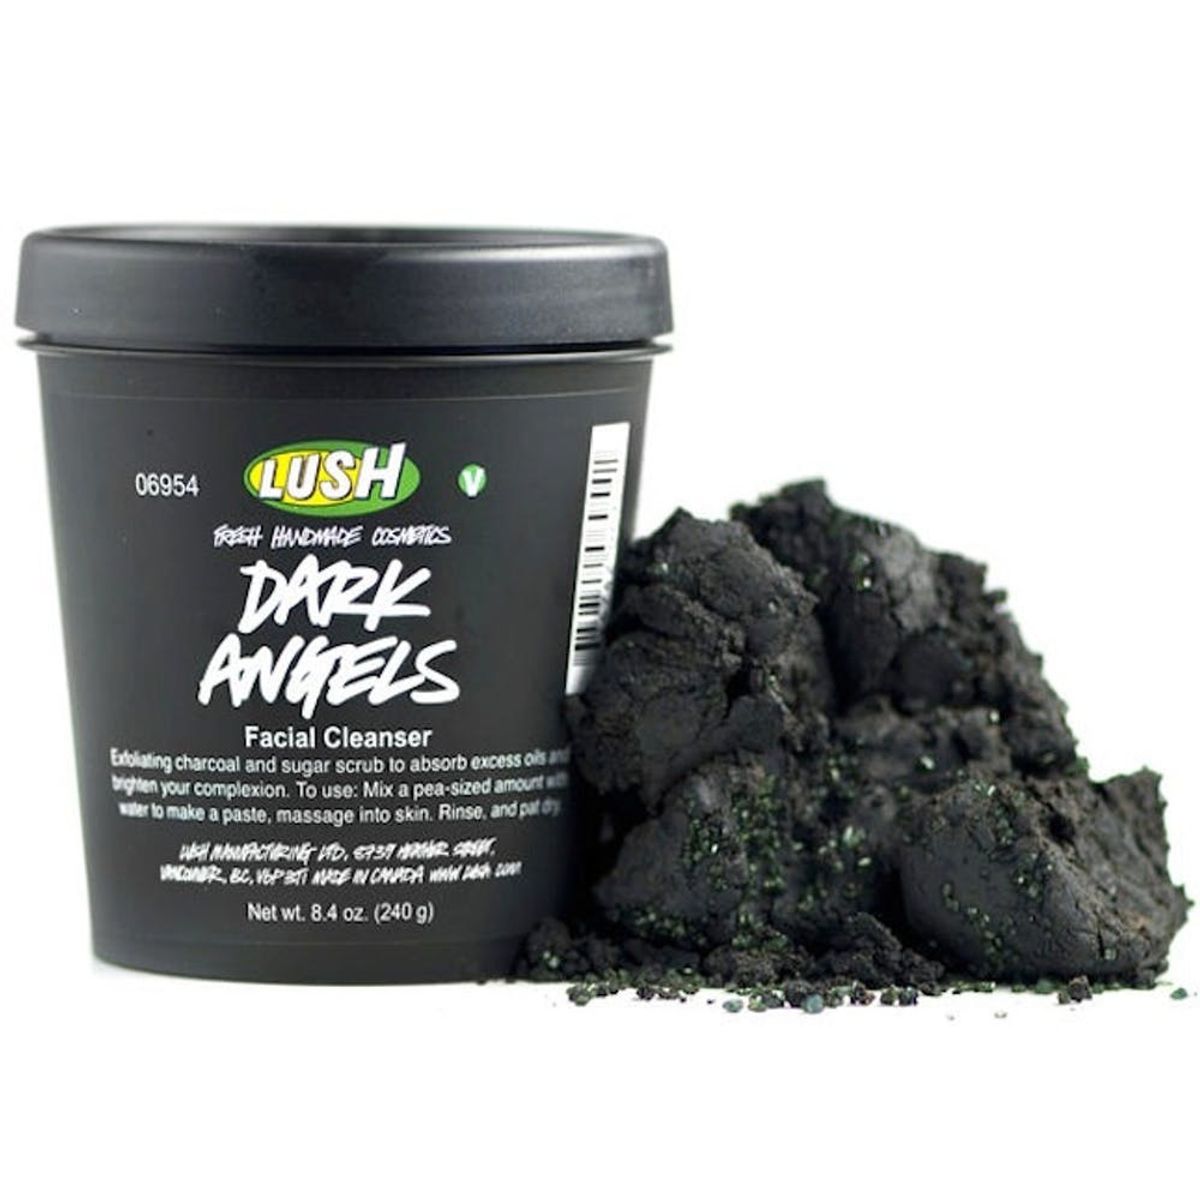 18 Charcoal Beauty Products That Will Transform Your Routine